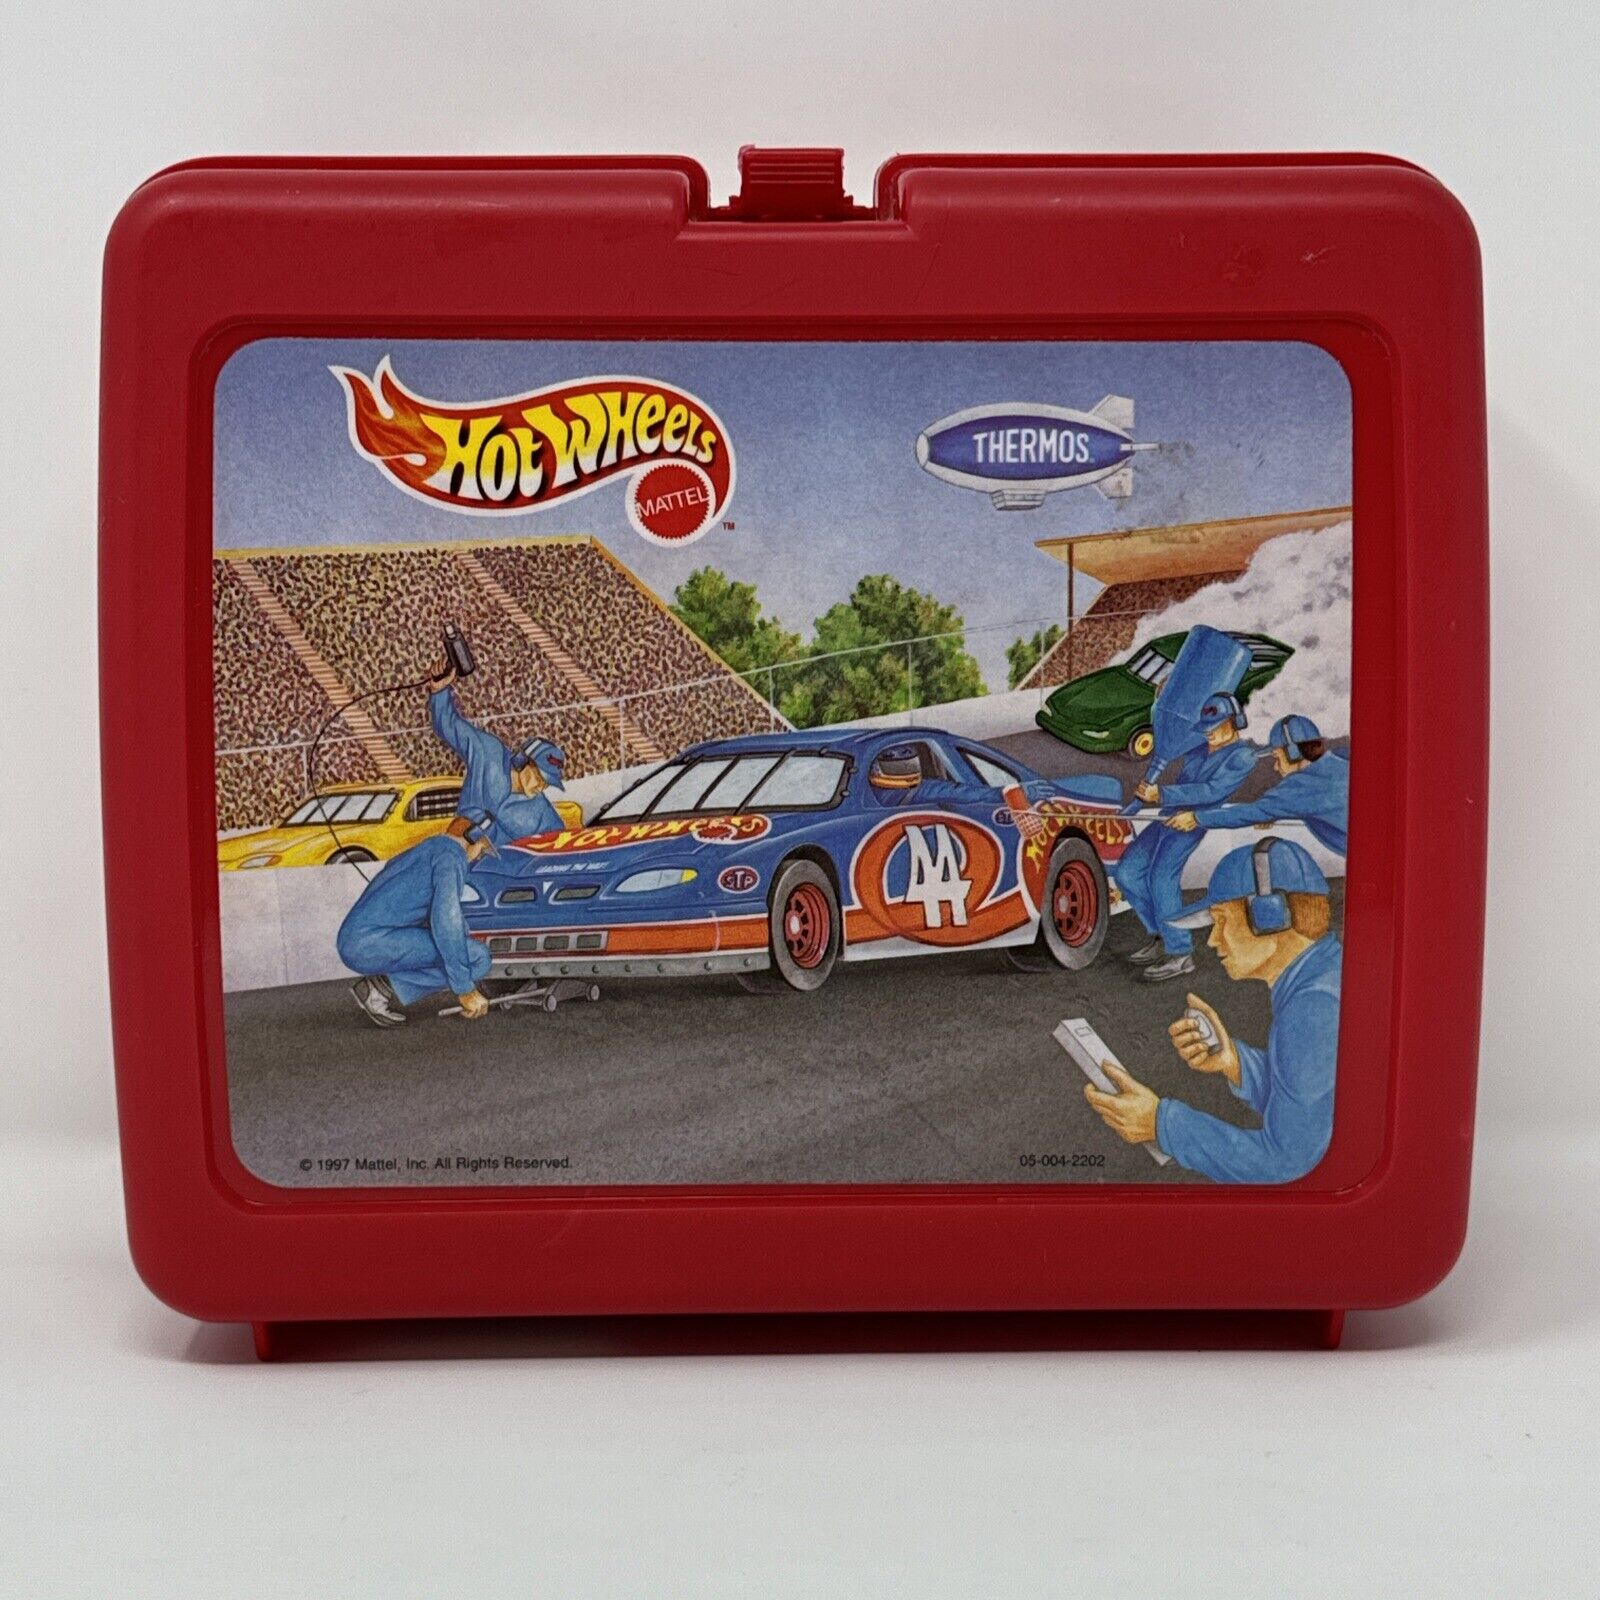 HOTWHEELS  - Vintage 1997 RED PLASTIC LUNCHBOX with BOTTLE